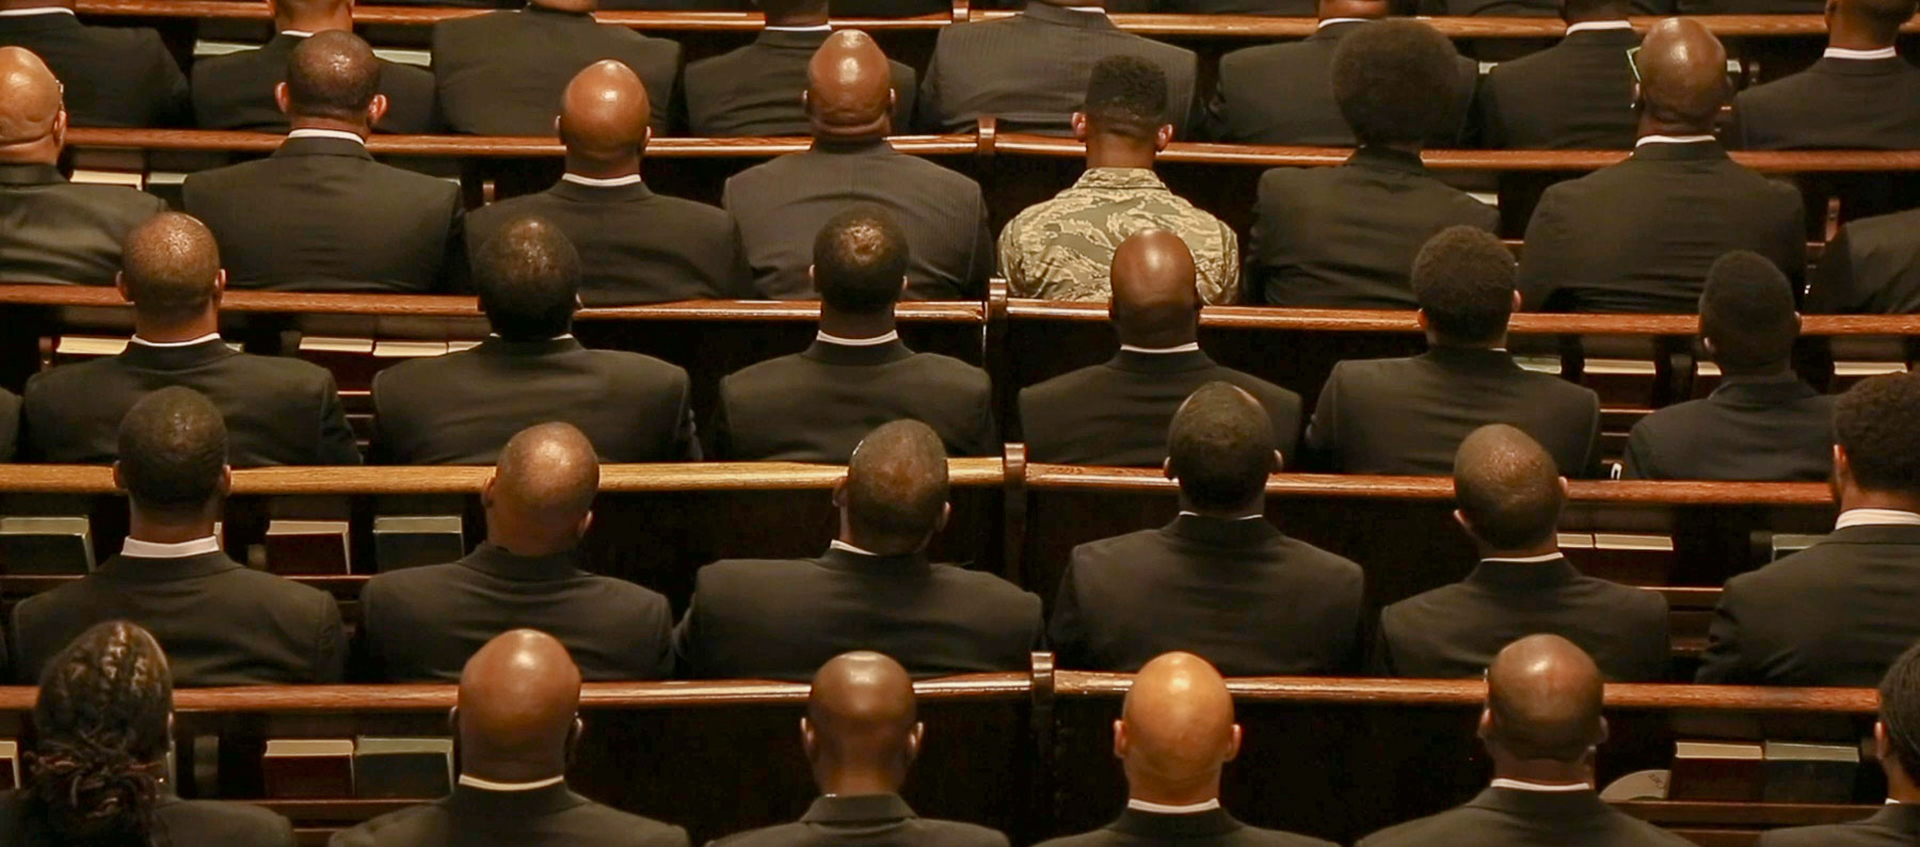 several people in dark suits, one in military fatigues, seated in pews